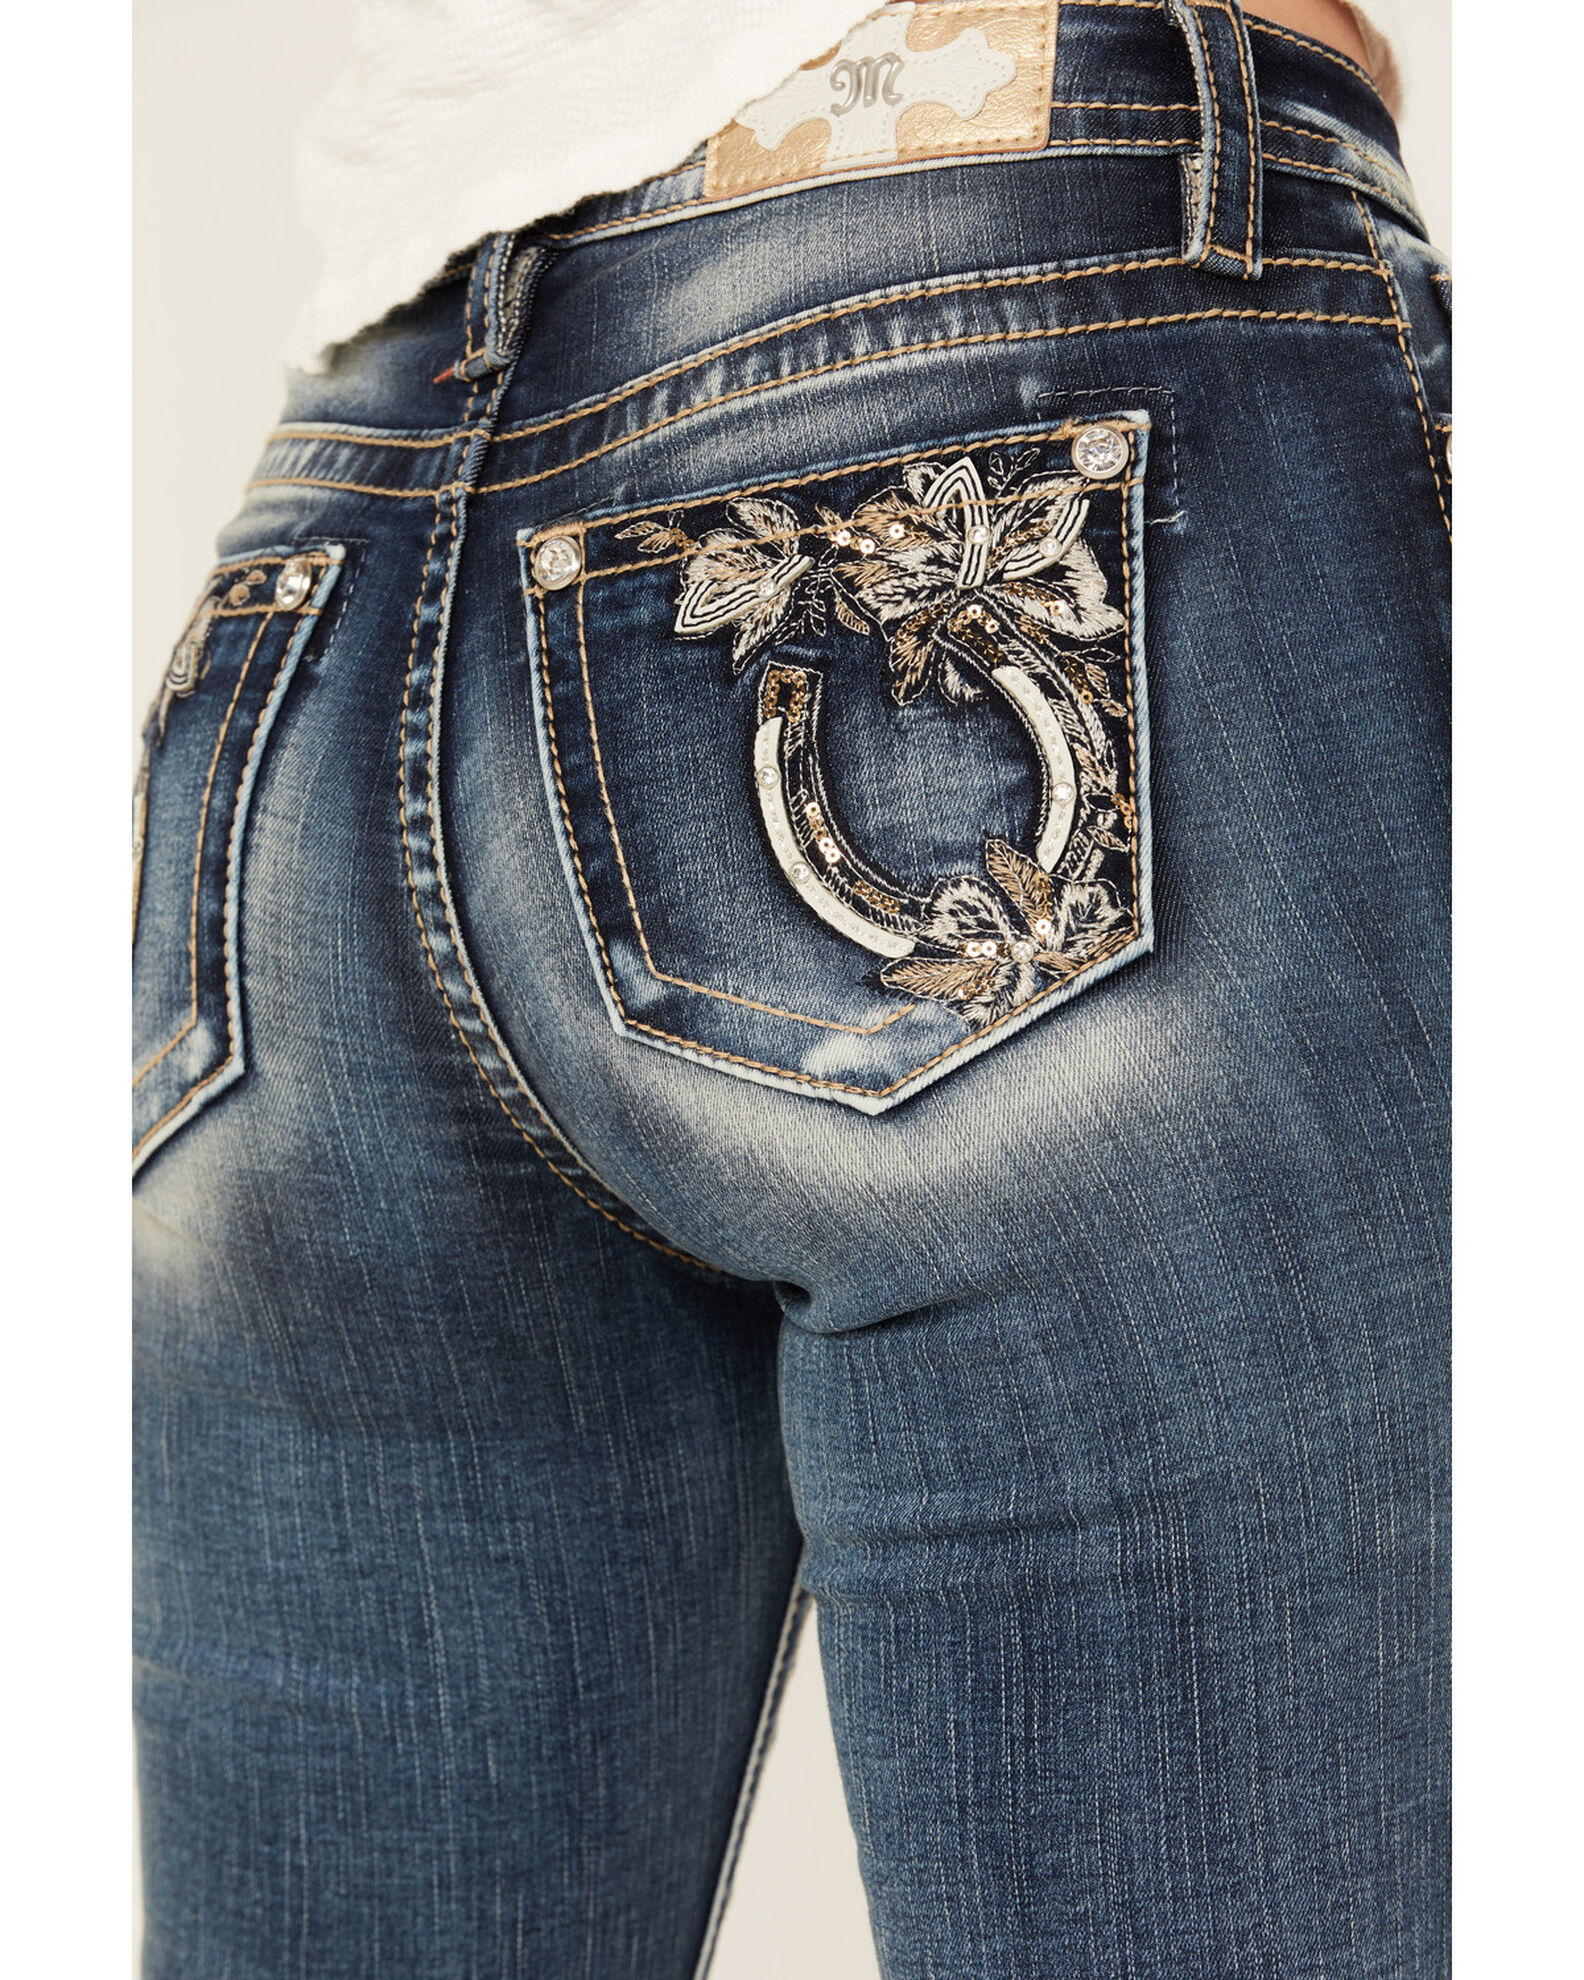 Product Name: Miss Me Women's Dark Wash Mid Rise Floral Horseshoe ...